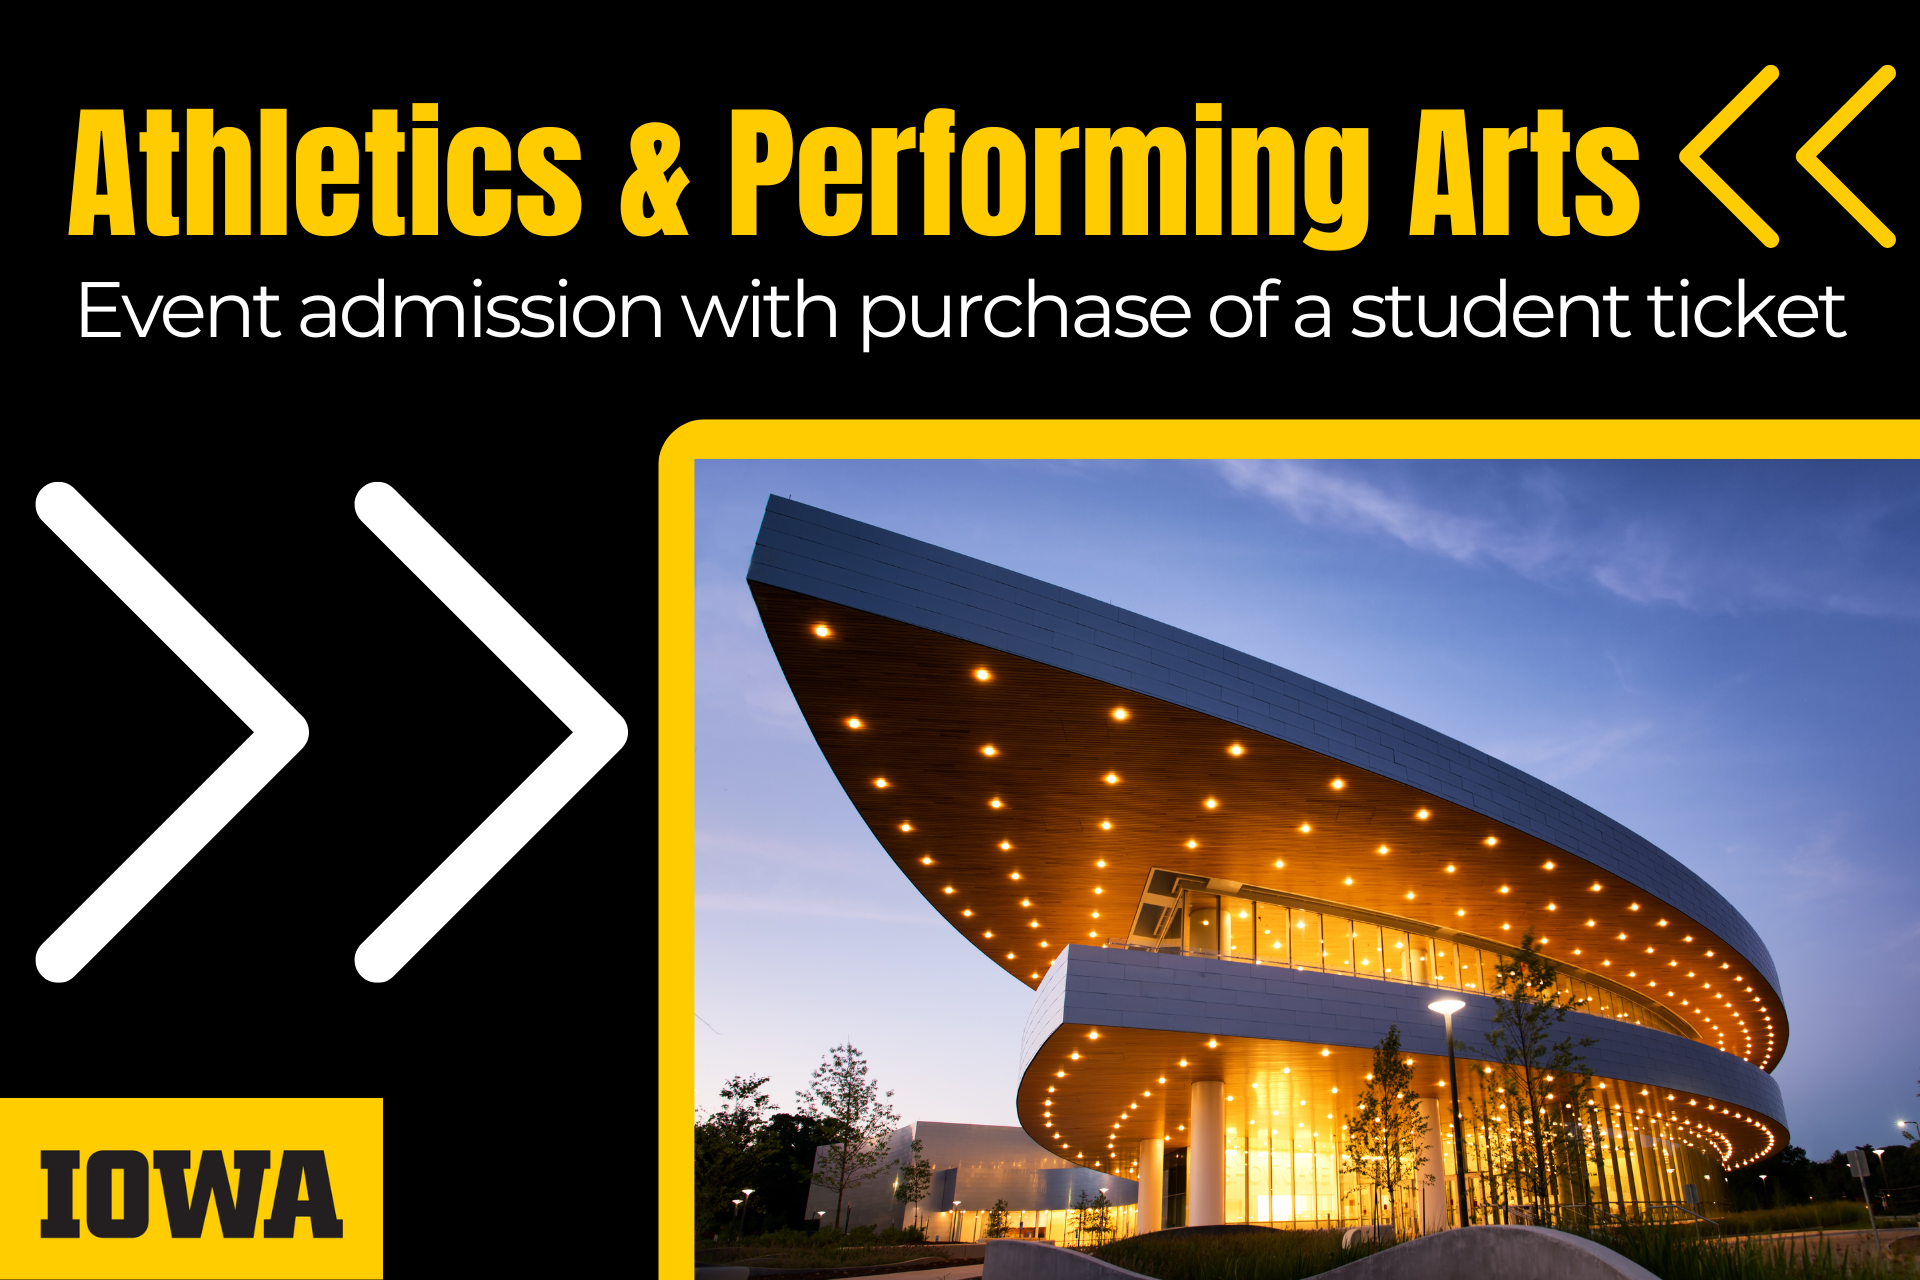 Athletics and Performing Arts event admission student ticket